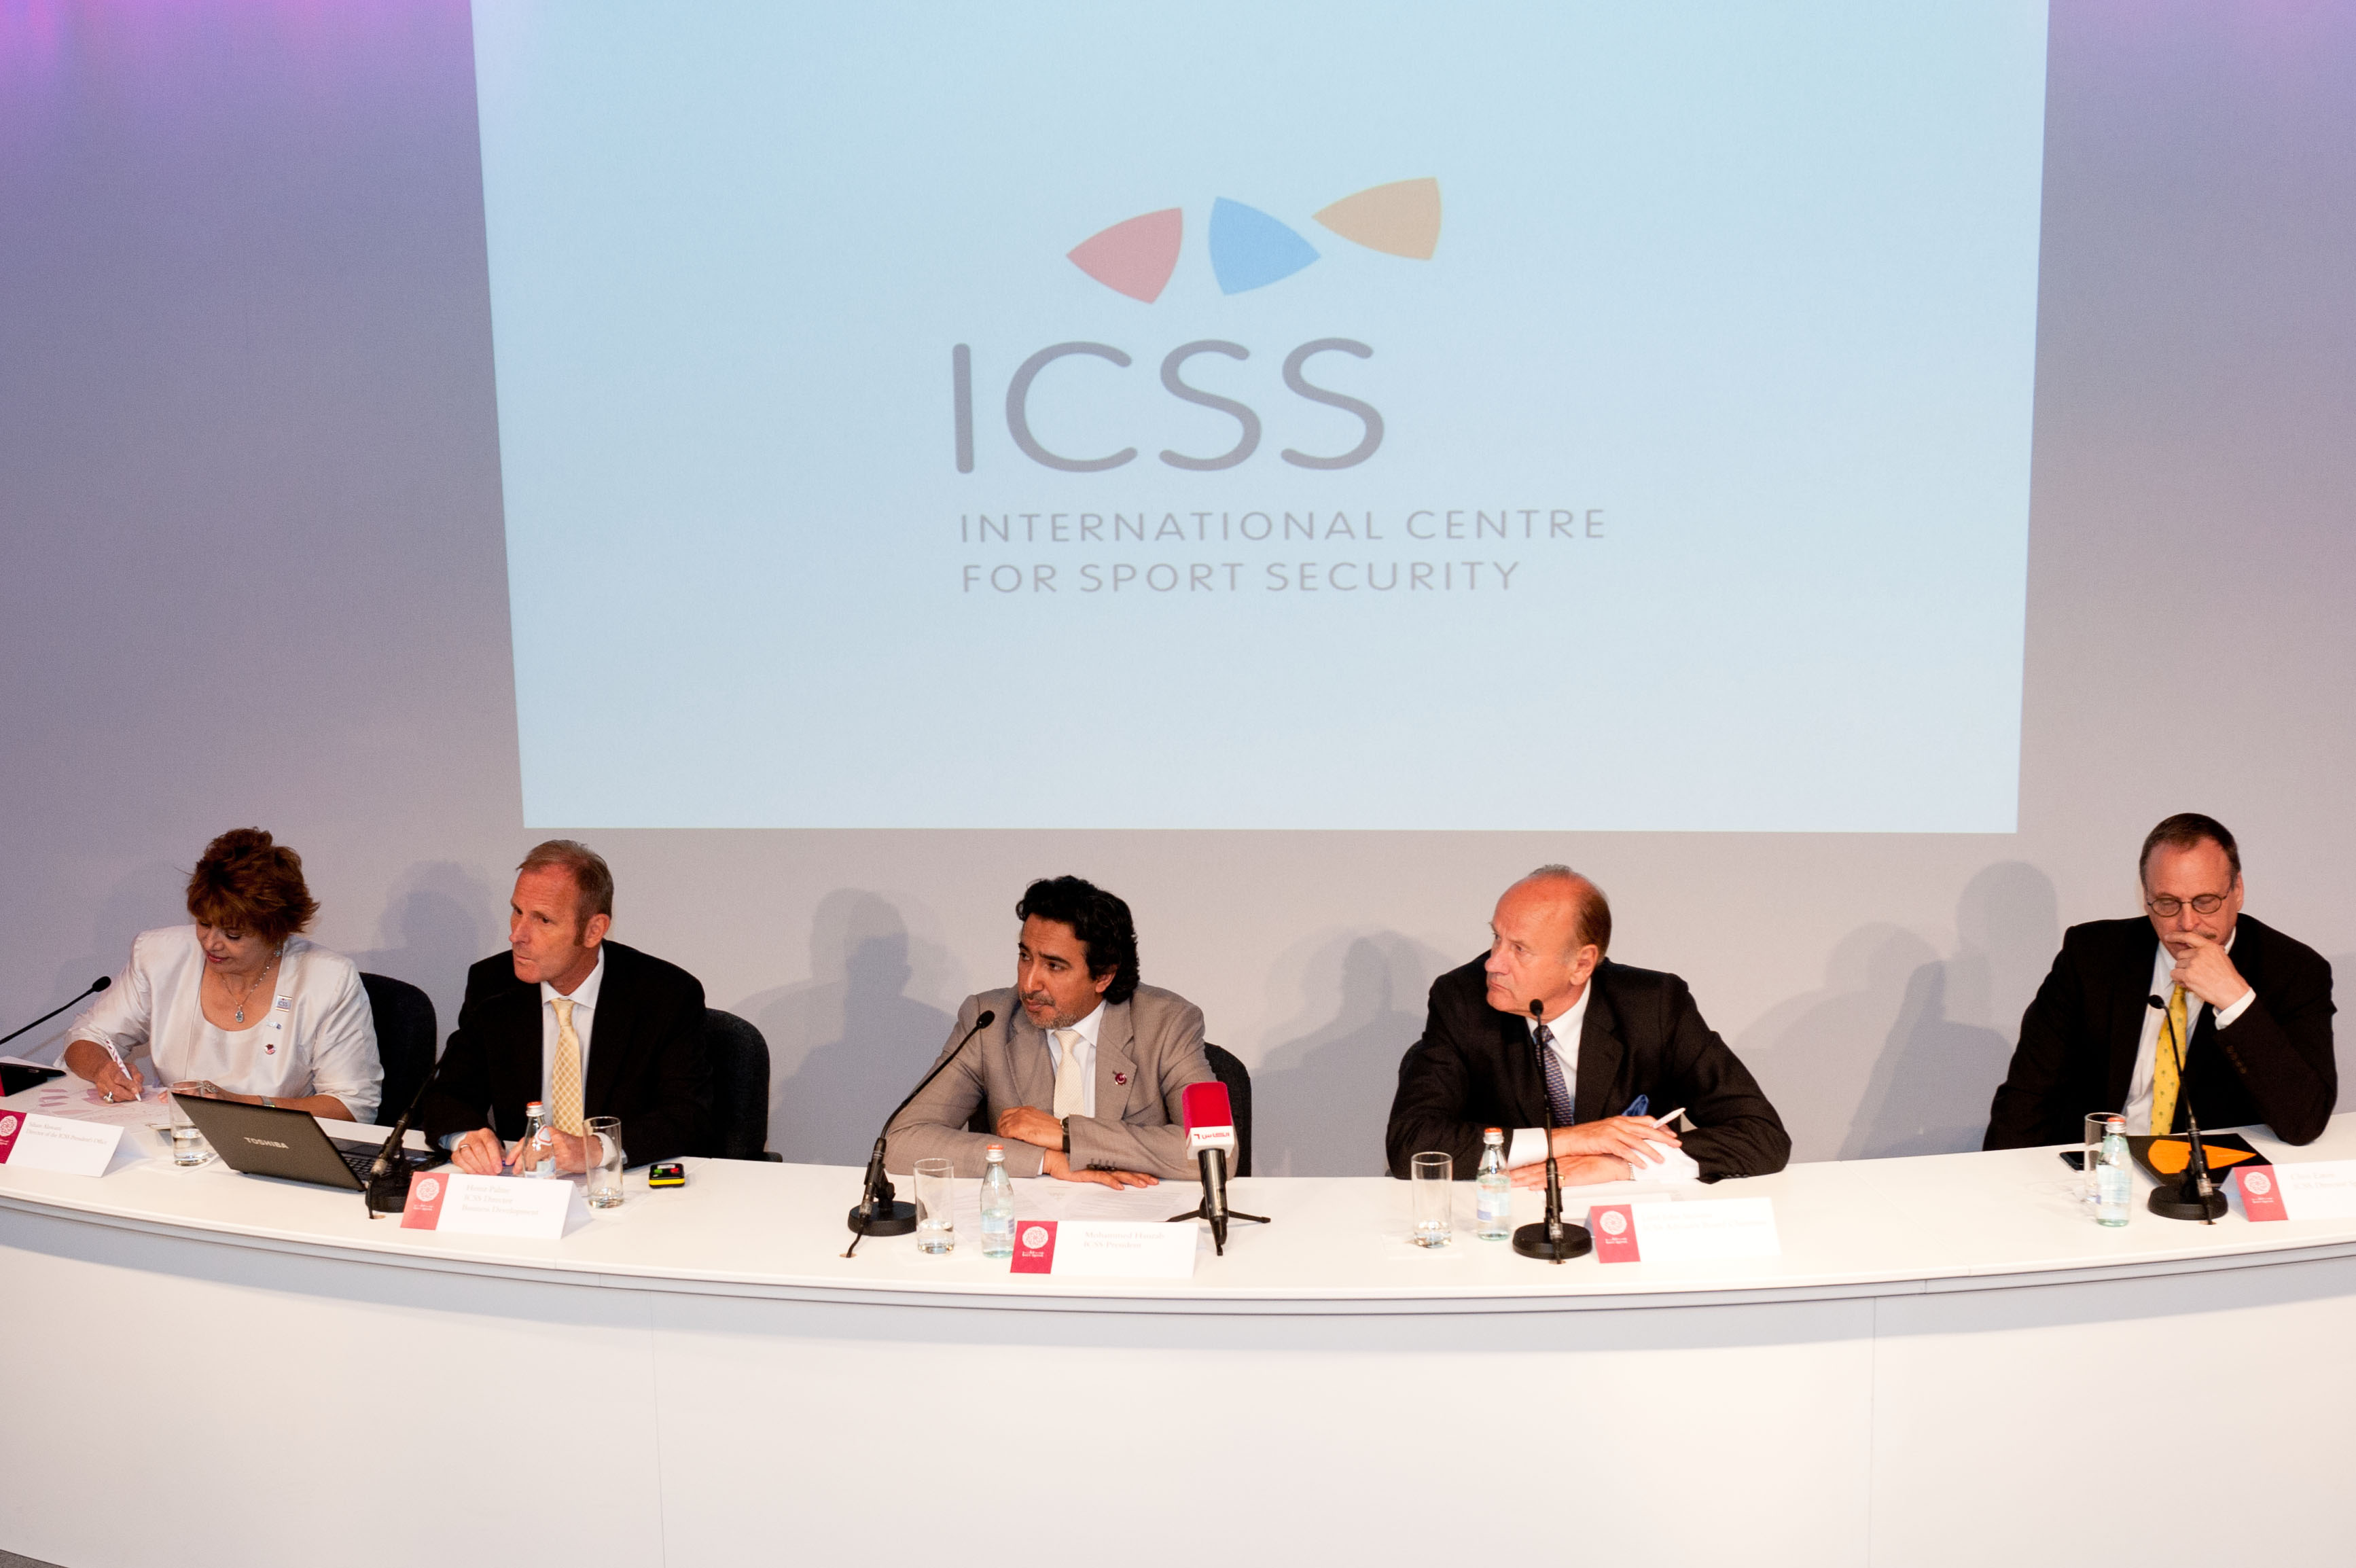 ICSS highlights the global challenge of protecting